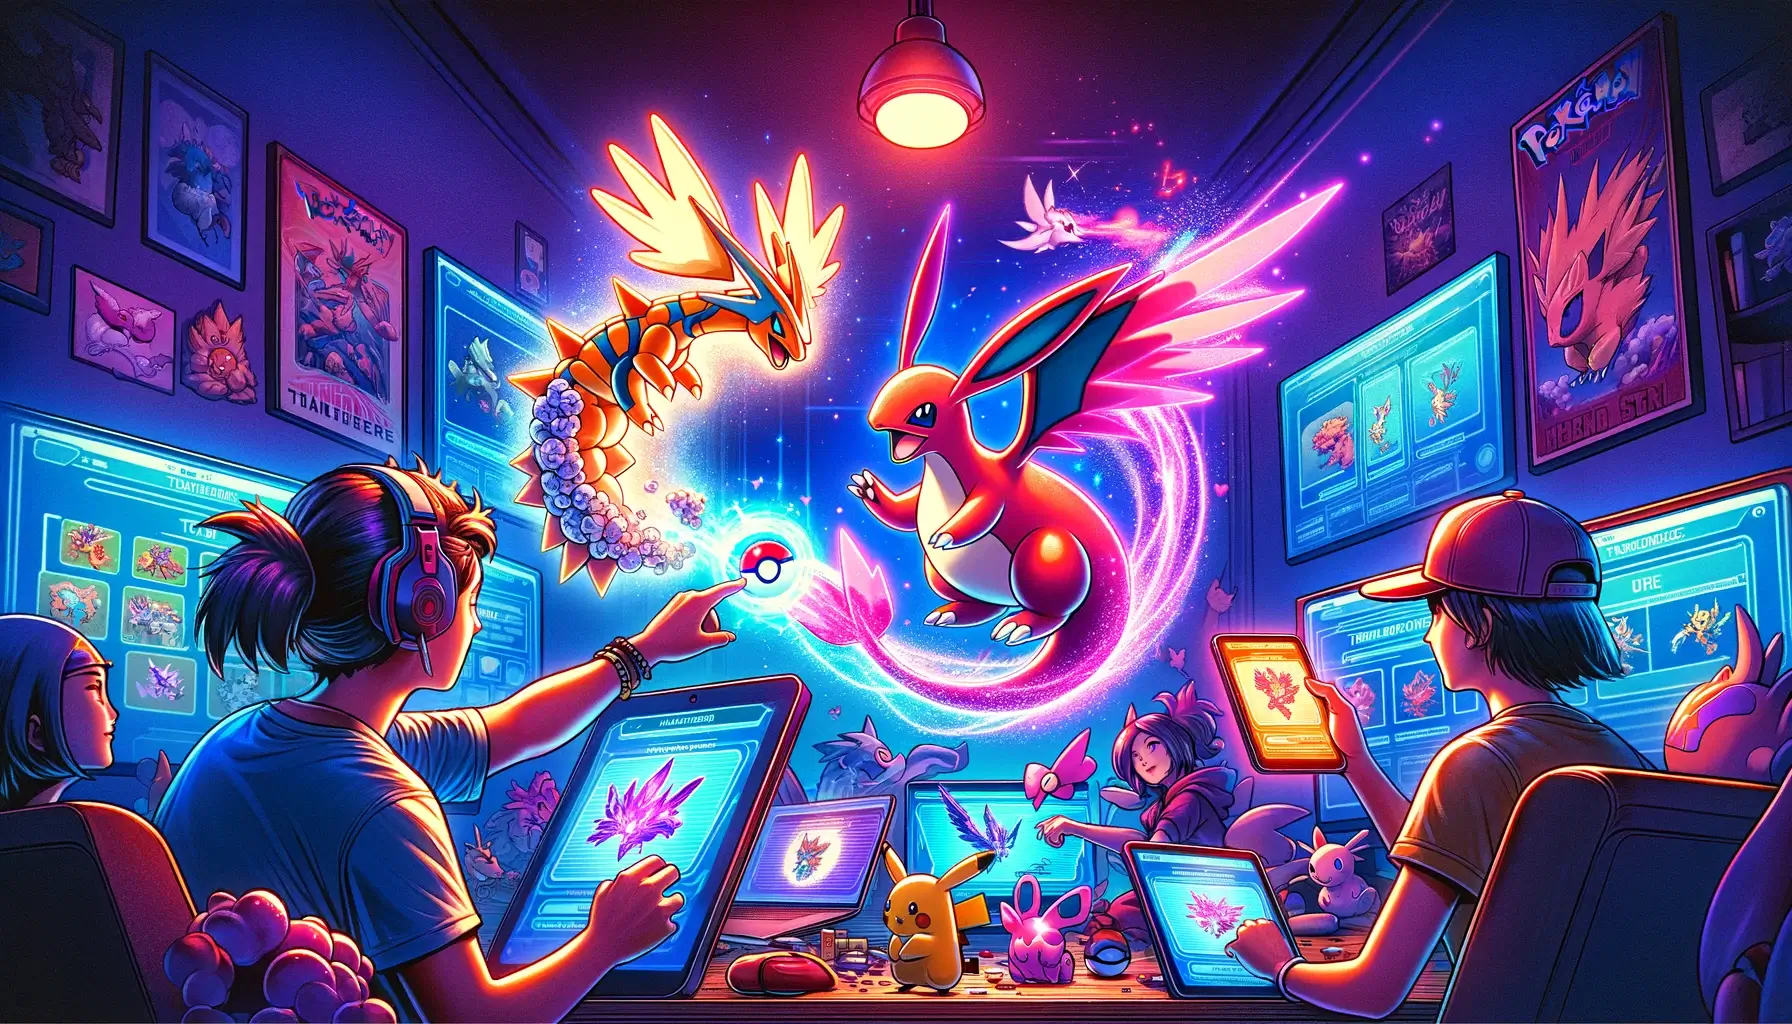 Pokemon Infinite Fusion Trade Evolutions'. The image shows a vibrant scene of two players exchanging Pok